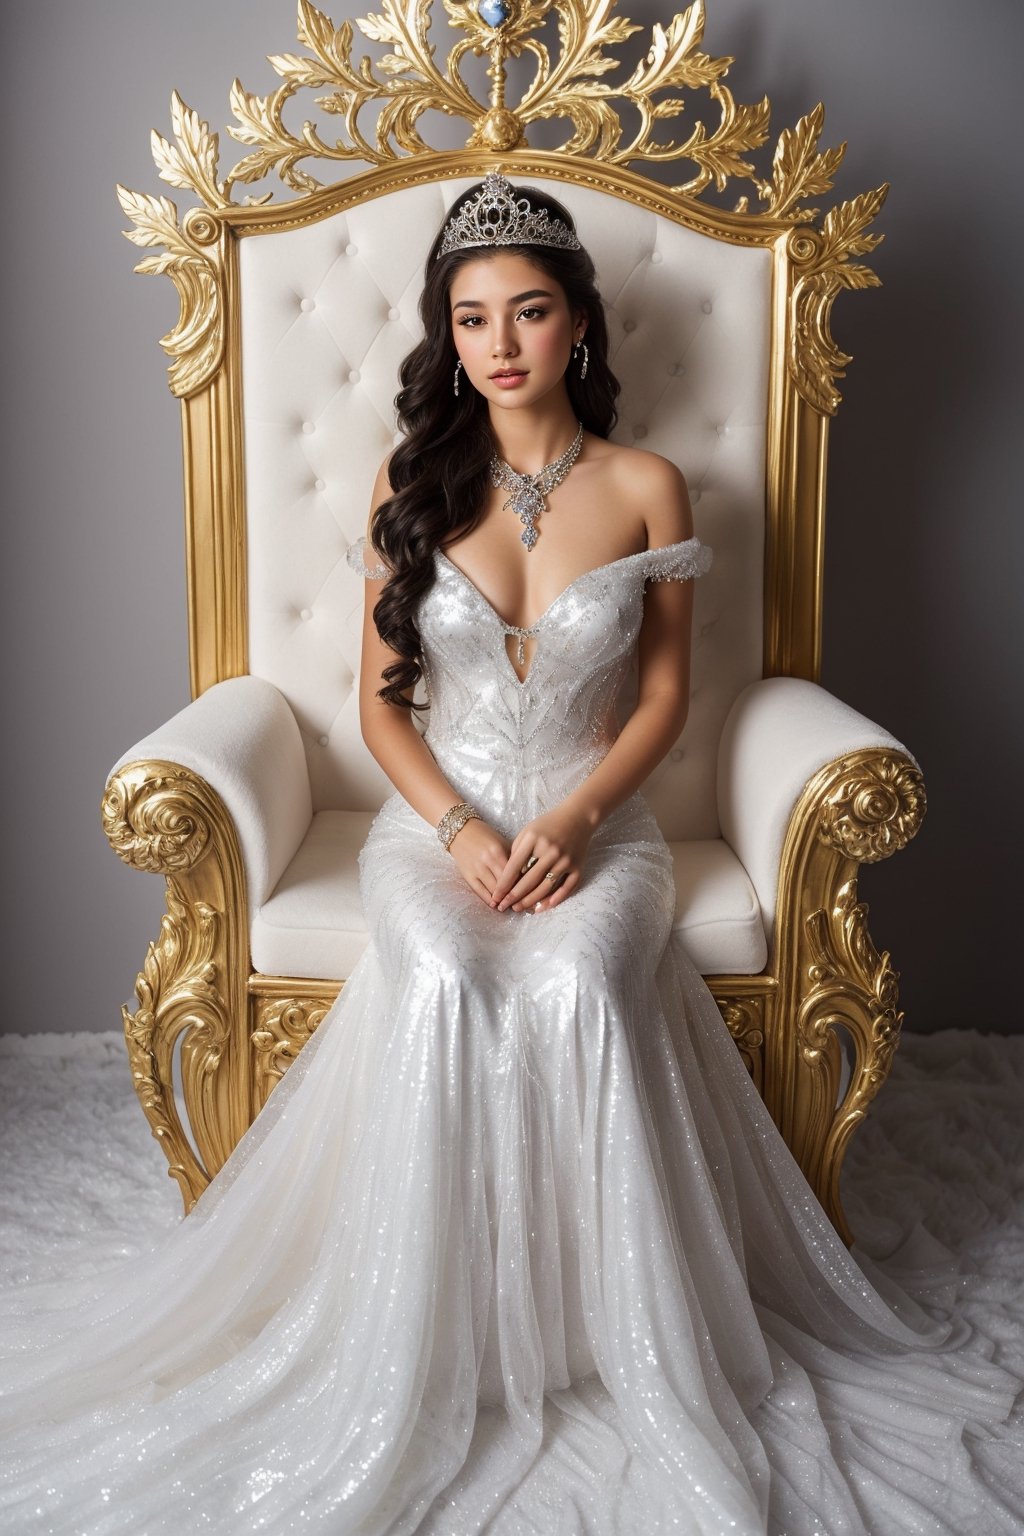  , Snow_Angel, Frozen, ((best quality)), ((masterpiece)), ((realistic)), ((18-year-old girl as a snow angel princess in a fantasy golden throne room, frozen, mystic fog, frost flowers)),{{blowjob}} ,{{cum}} ,In the grandeur of a throne room, an 18-year-old girl embodies the enchantment of a snow angel princess. Adorned with elegant earrings, intricate jewelry, and a tribal tattoo, she exudes a sense of regality and grace. Her flowing hair, infused with a radiant glow, cascades around her, accentuated by an ethereal ice hair ornament and a necklace fashioned from glistening ice. 